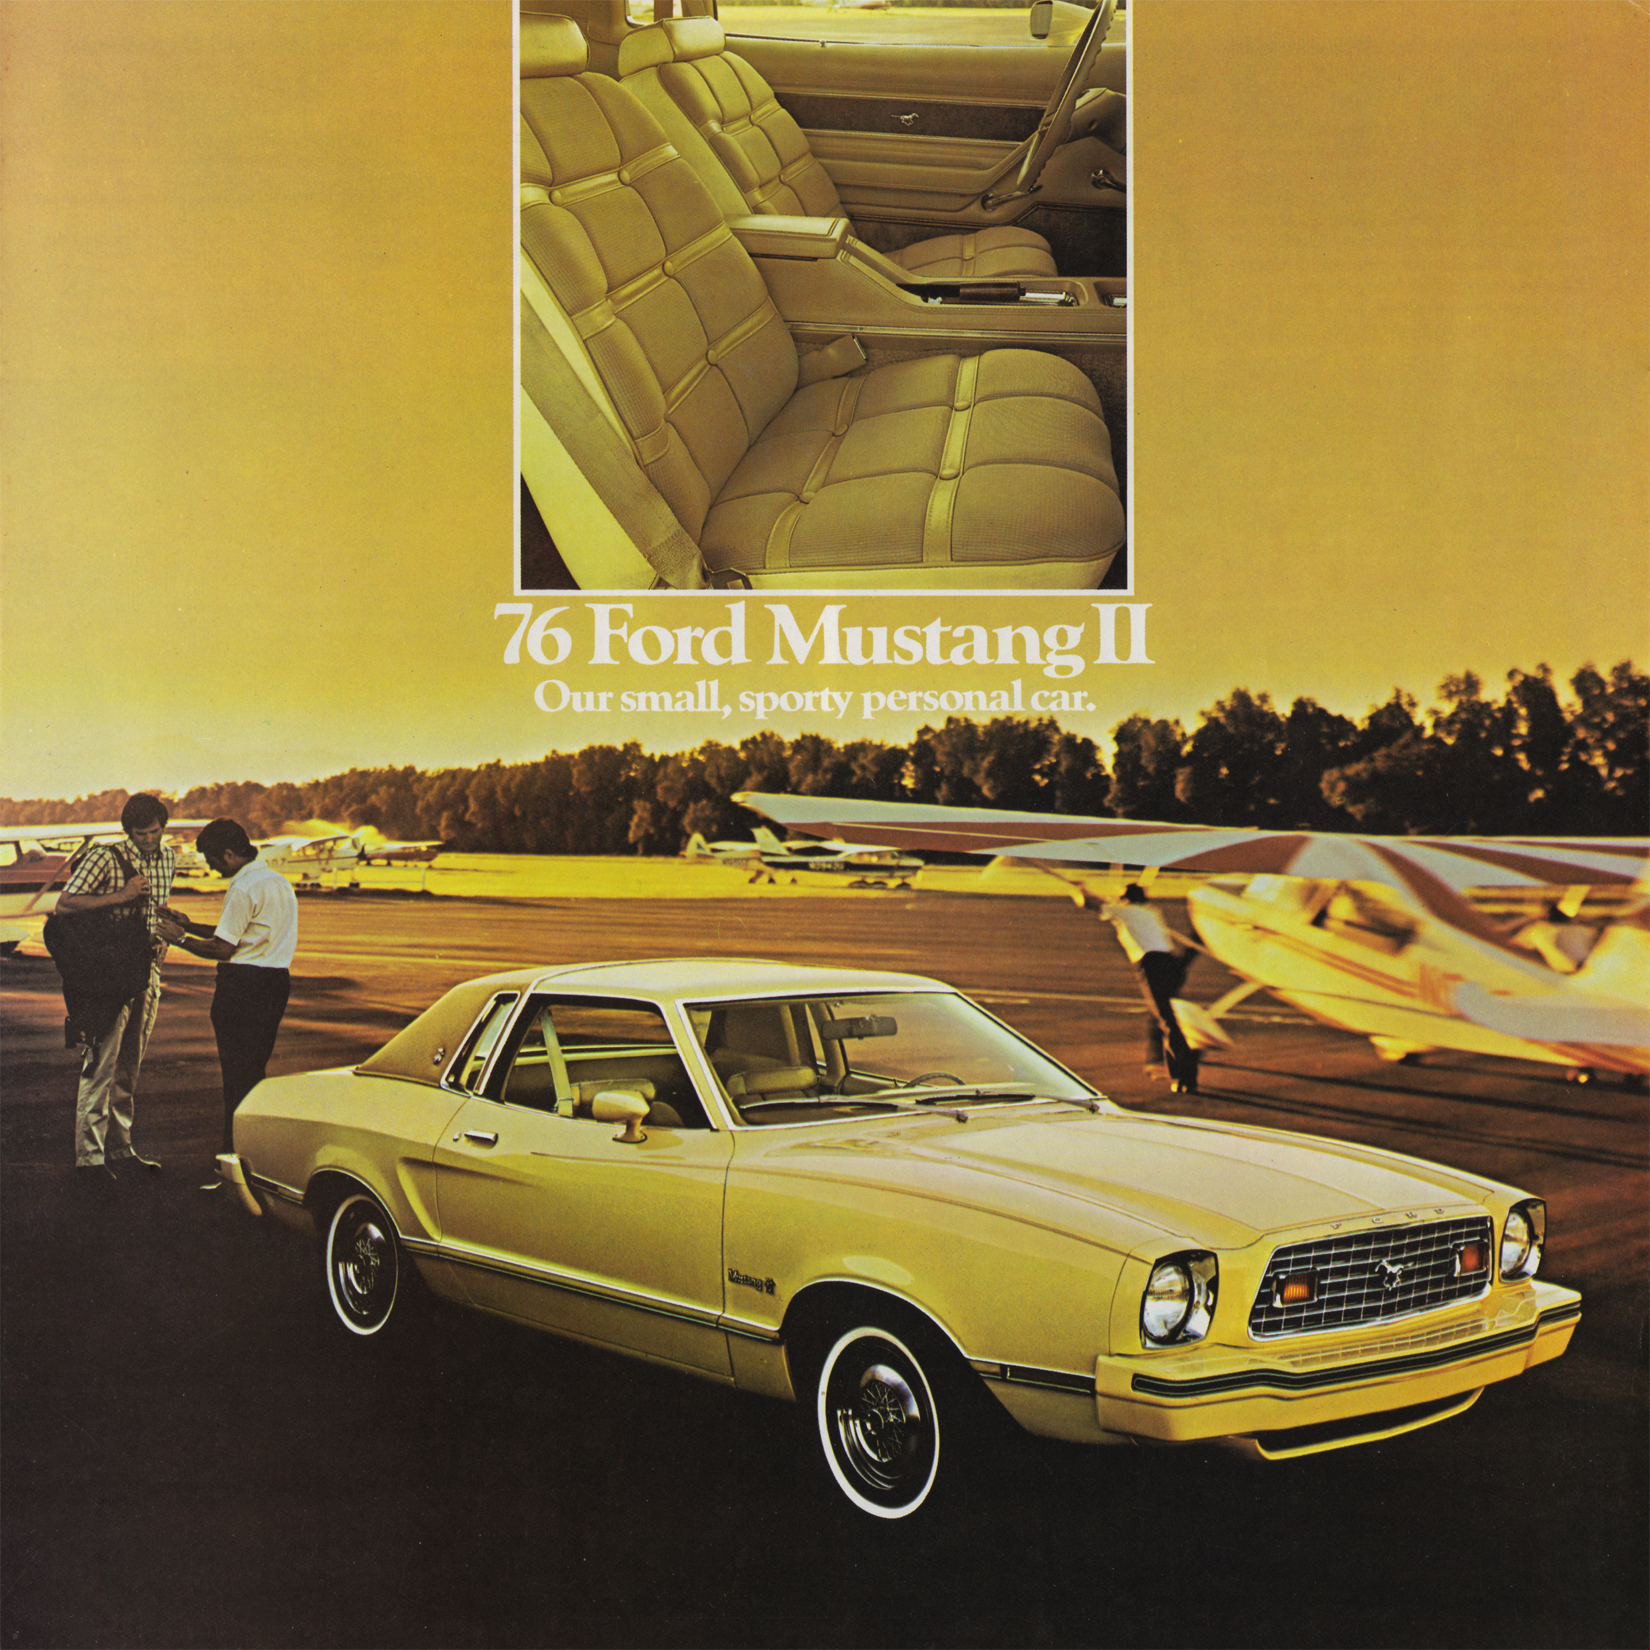 1976 Ford Mustang II Brochure Page 5